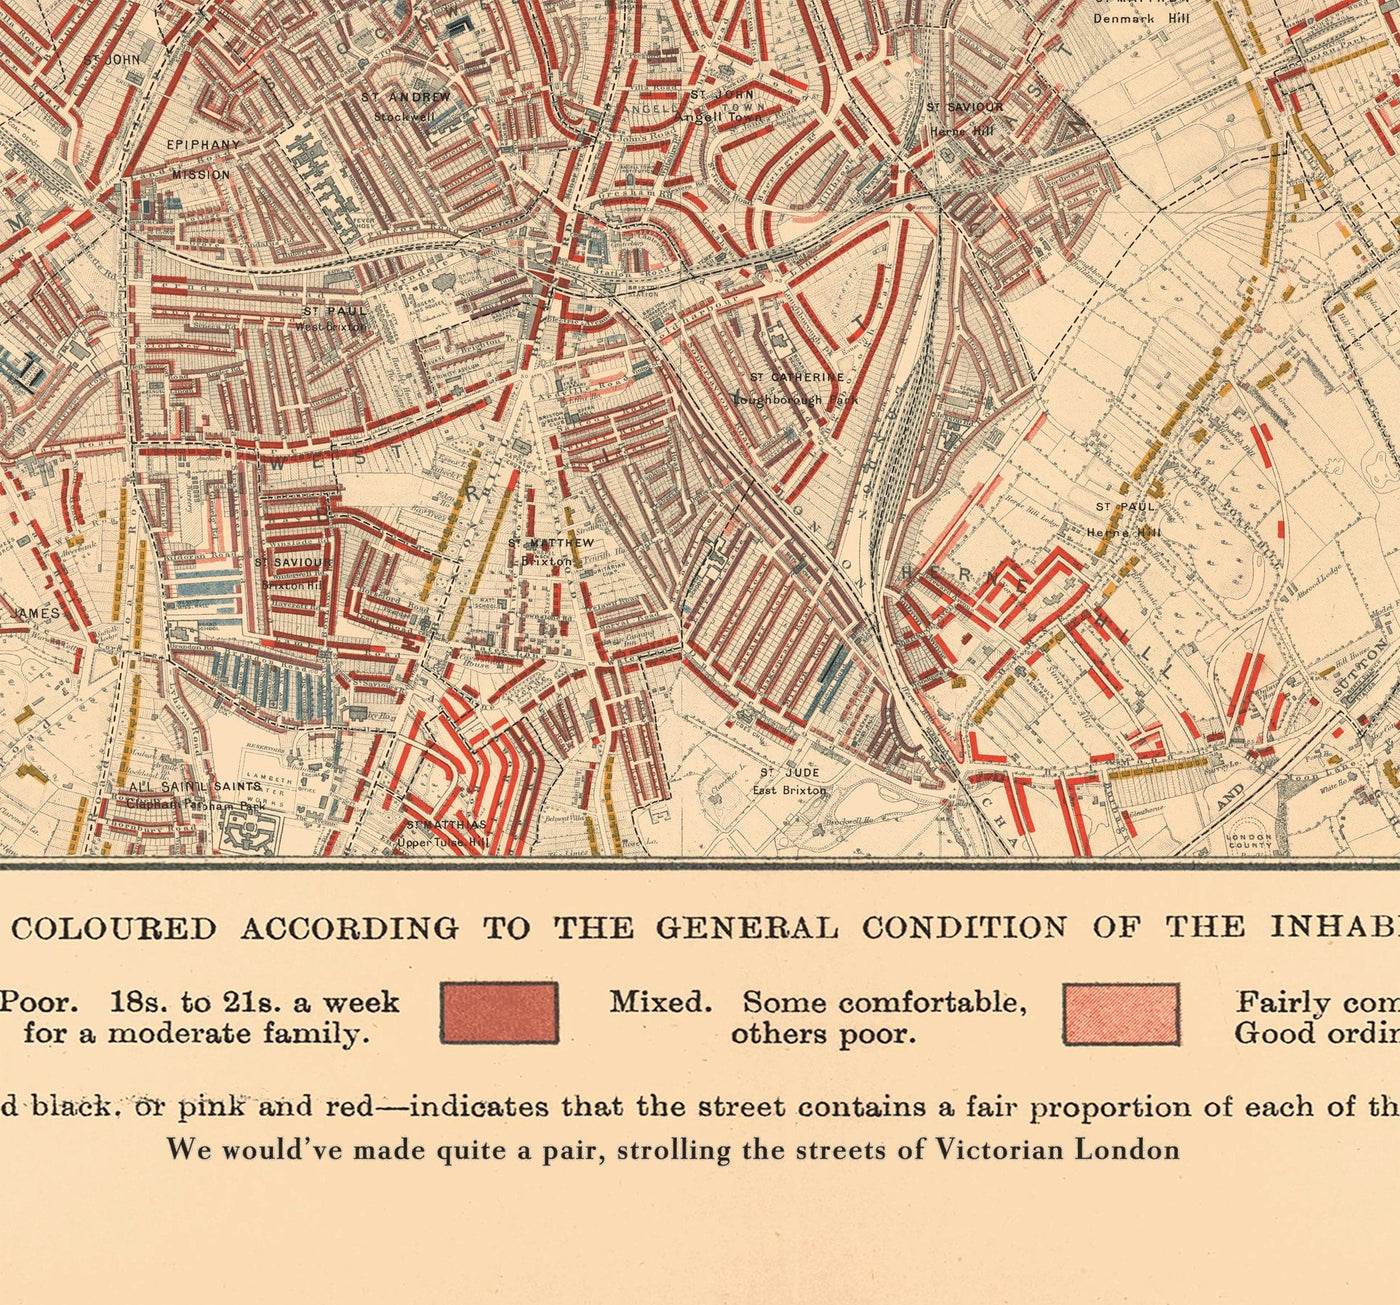 Map of London Poverty 1898-9, South Eastern District, by Charles Booth - New Cross, Blackheath, Nunhead, Deptford - SE8, SE10, SE14, SE4, SE13